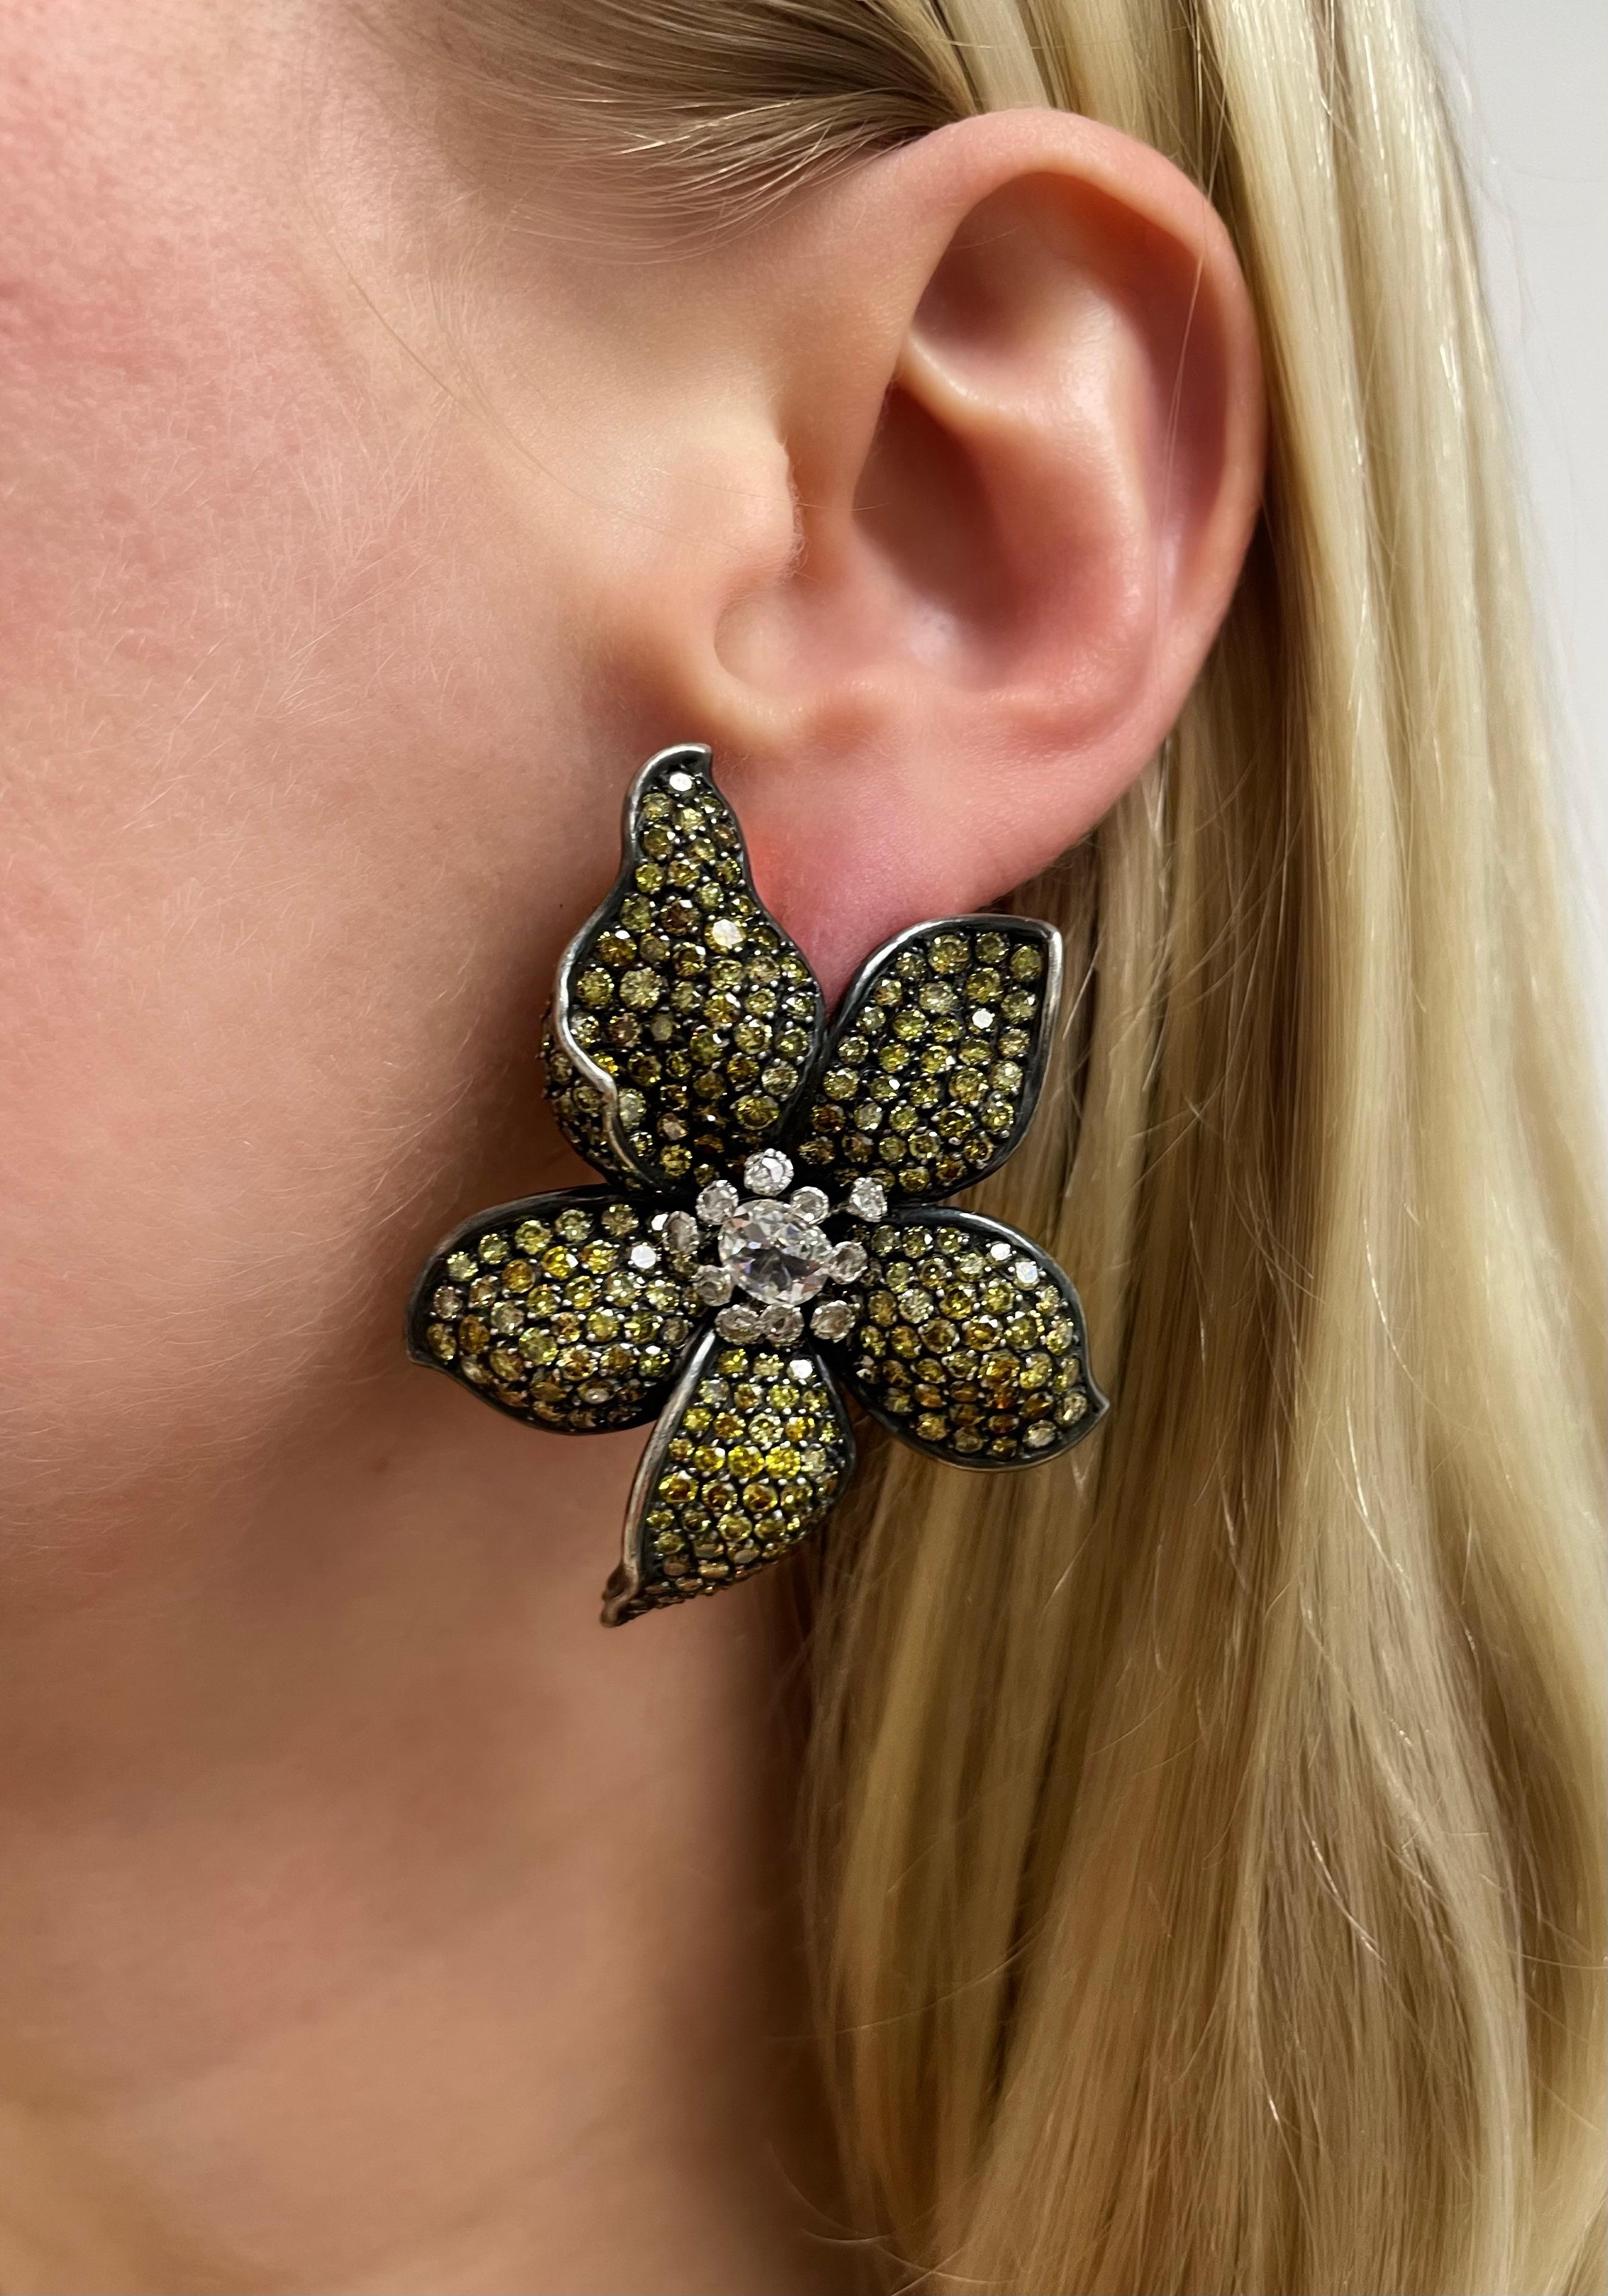 These absolutely gorgeous flower earrings boast two antique cut diamonds weighing approximately 1.00 carat total surrounded by 20 rose cut diamonds and numerous round brilliant cut yellow diamonds (origin of color not tested) weighing approximately